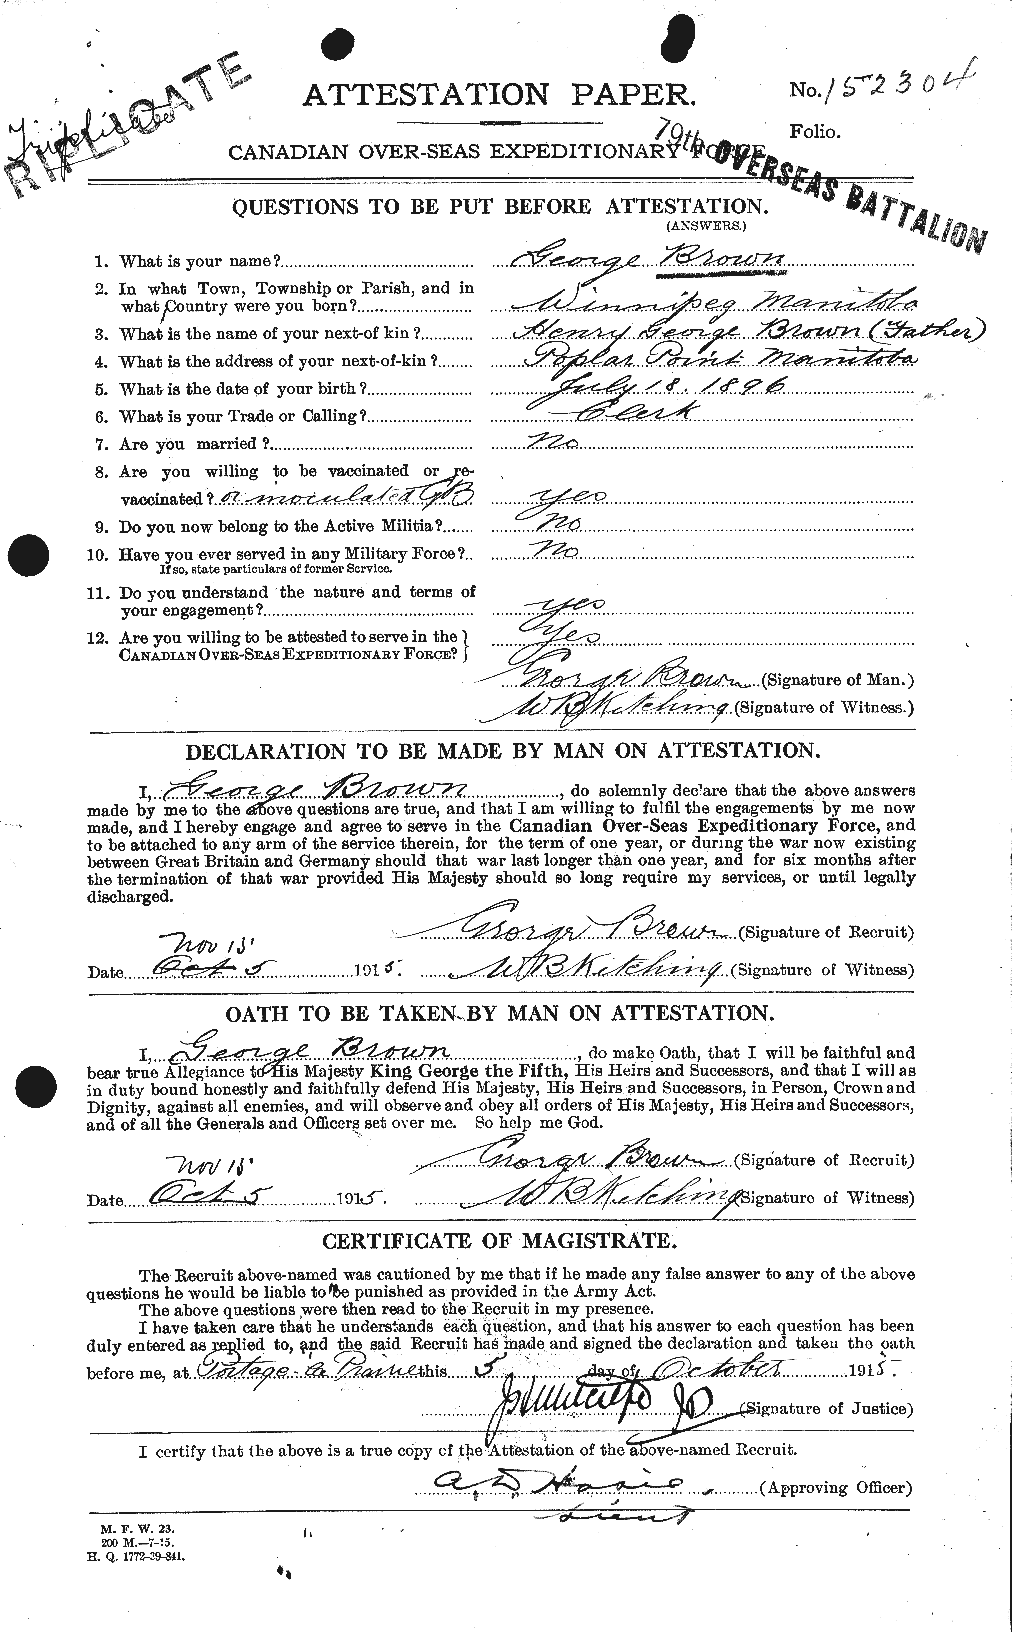 Personnel Records of the First World War - CEF 267861a